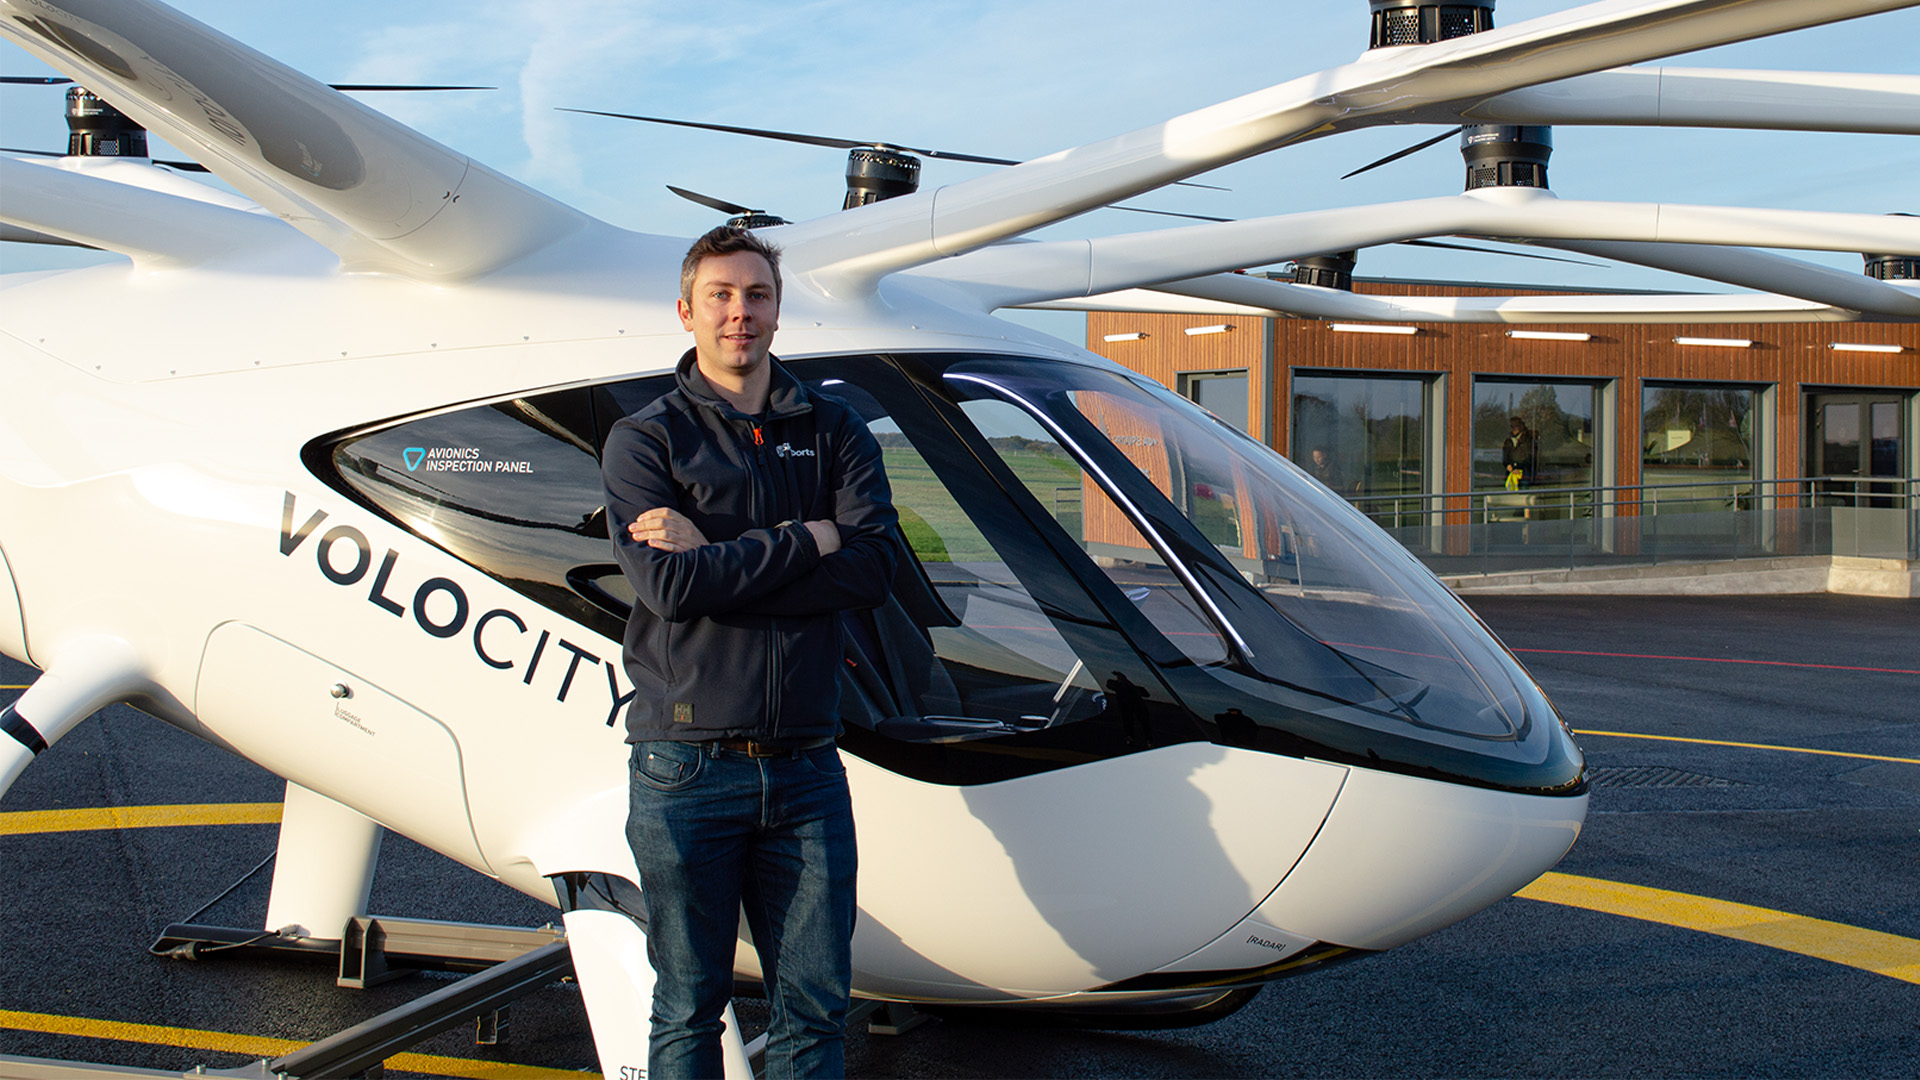 Man stood in front of an electric helicopter at a landing pad